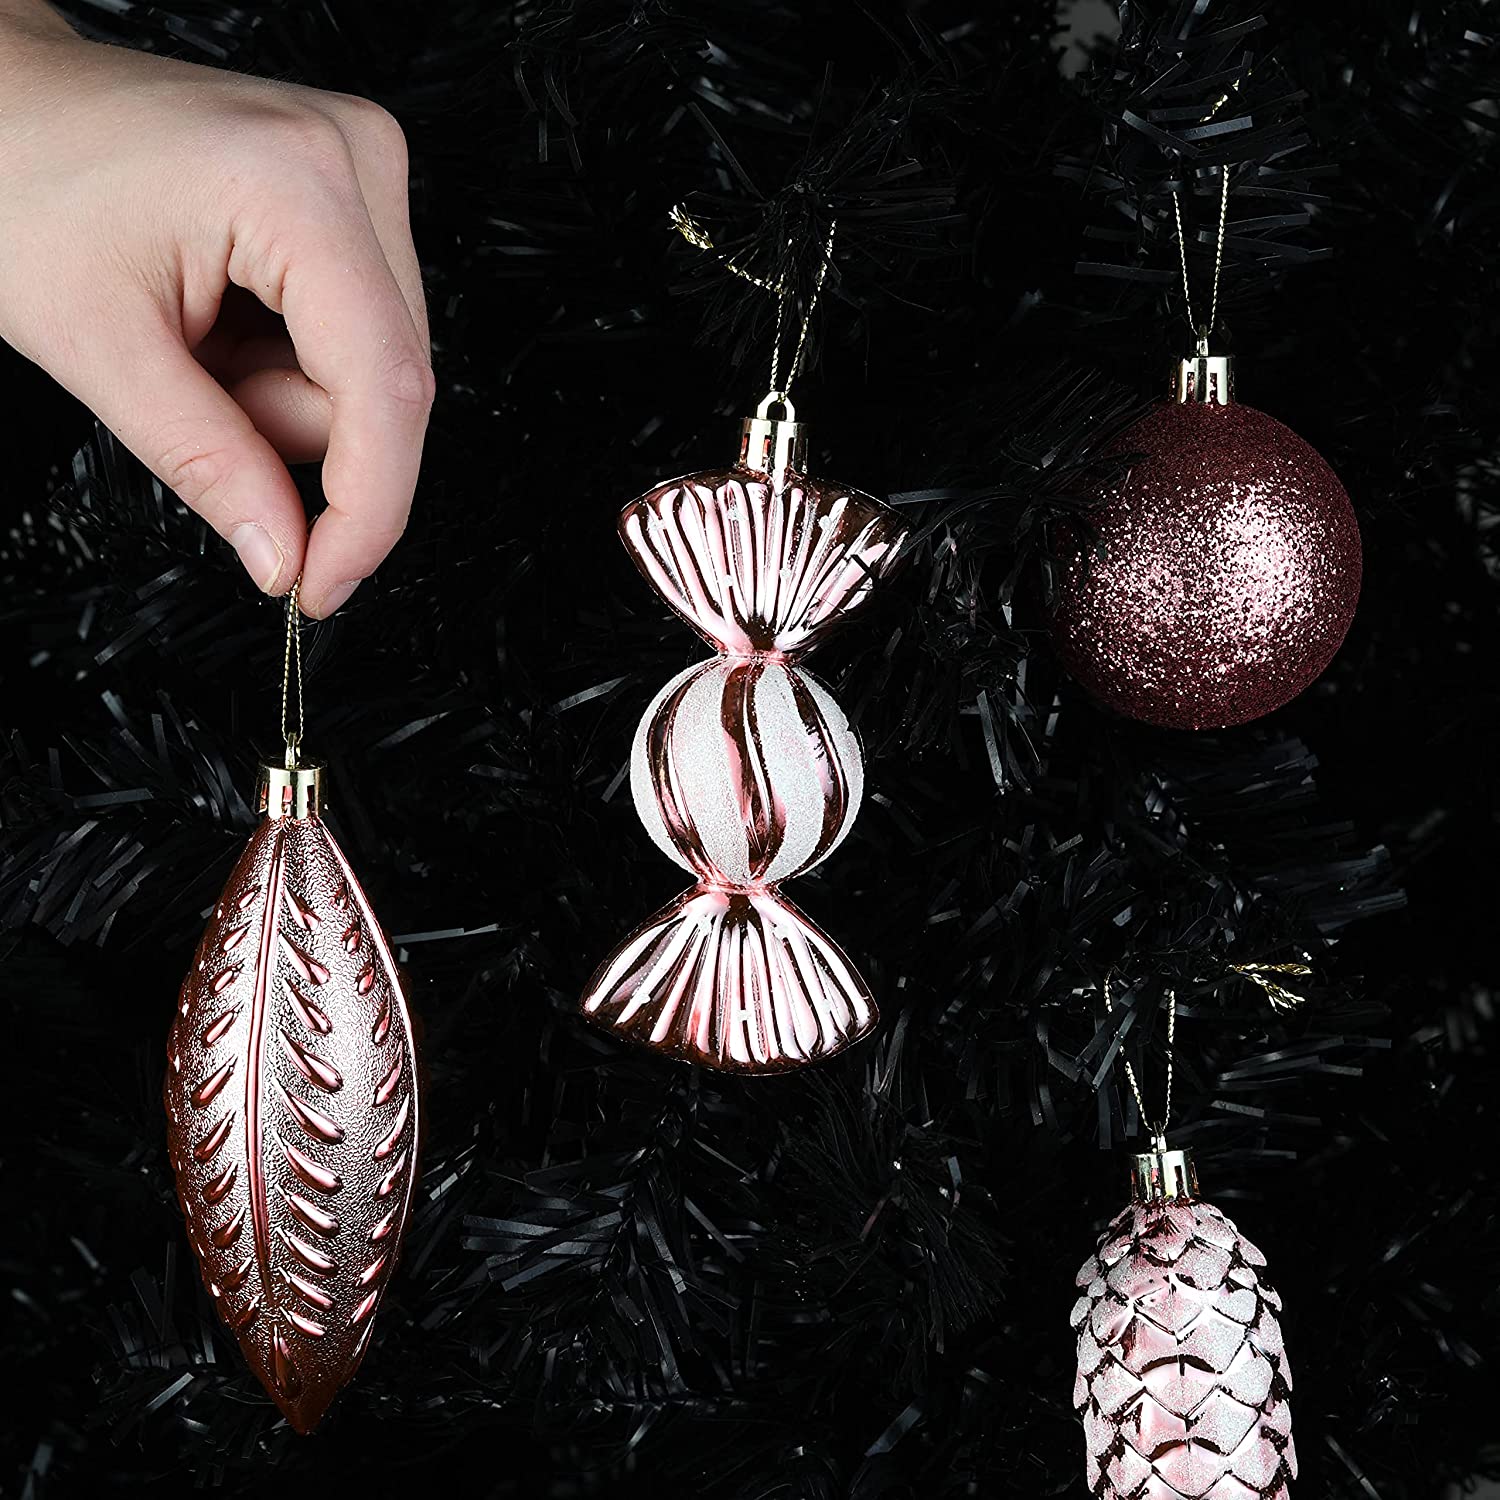 Rose Gold Christmas Ball Ornaments for Christmas Decorations - 24 Pieces Xmas Tree Shatterproof Ornaments with Hanging Loop for Holiday and Party Decoration (Combo of 8 Ball and Shaped Styles) - image 4 of 7